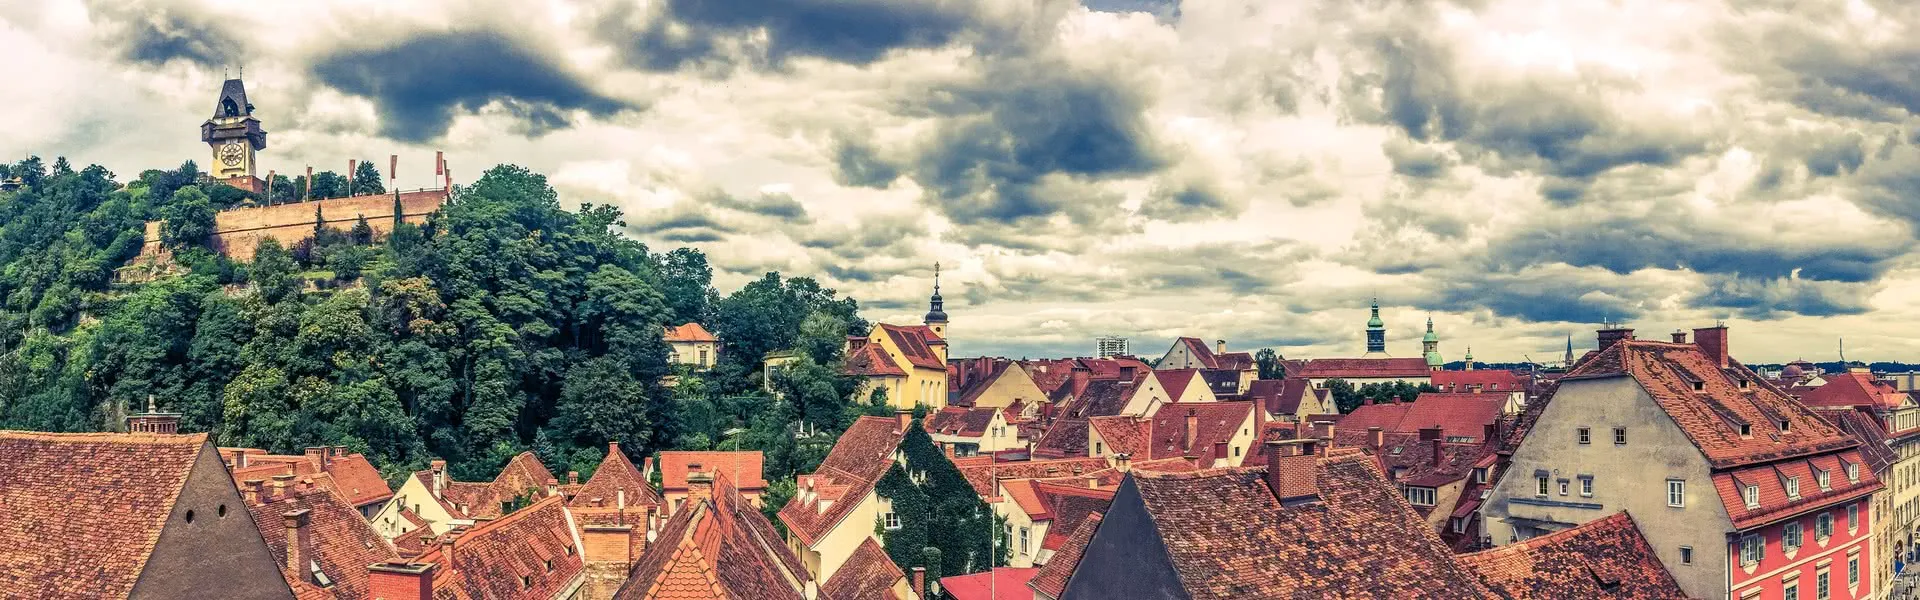 Graz - the destination with youth hostels